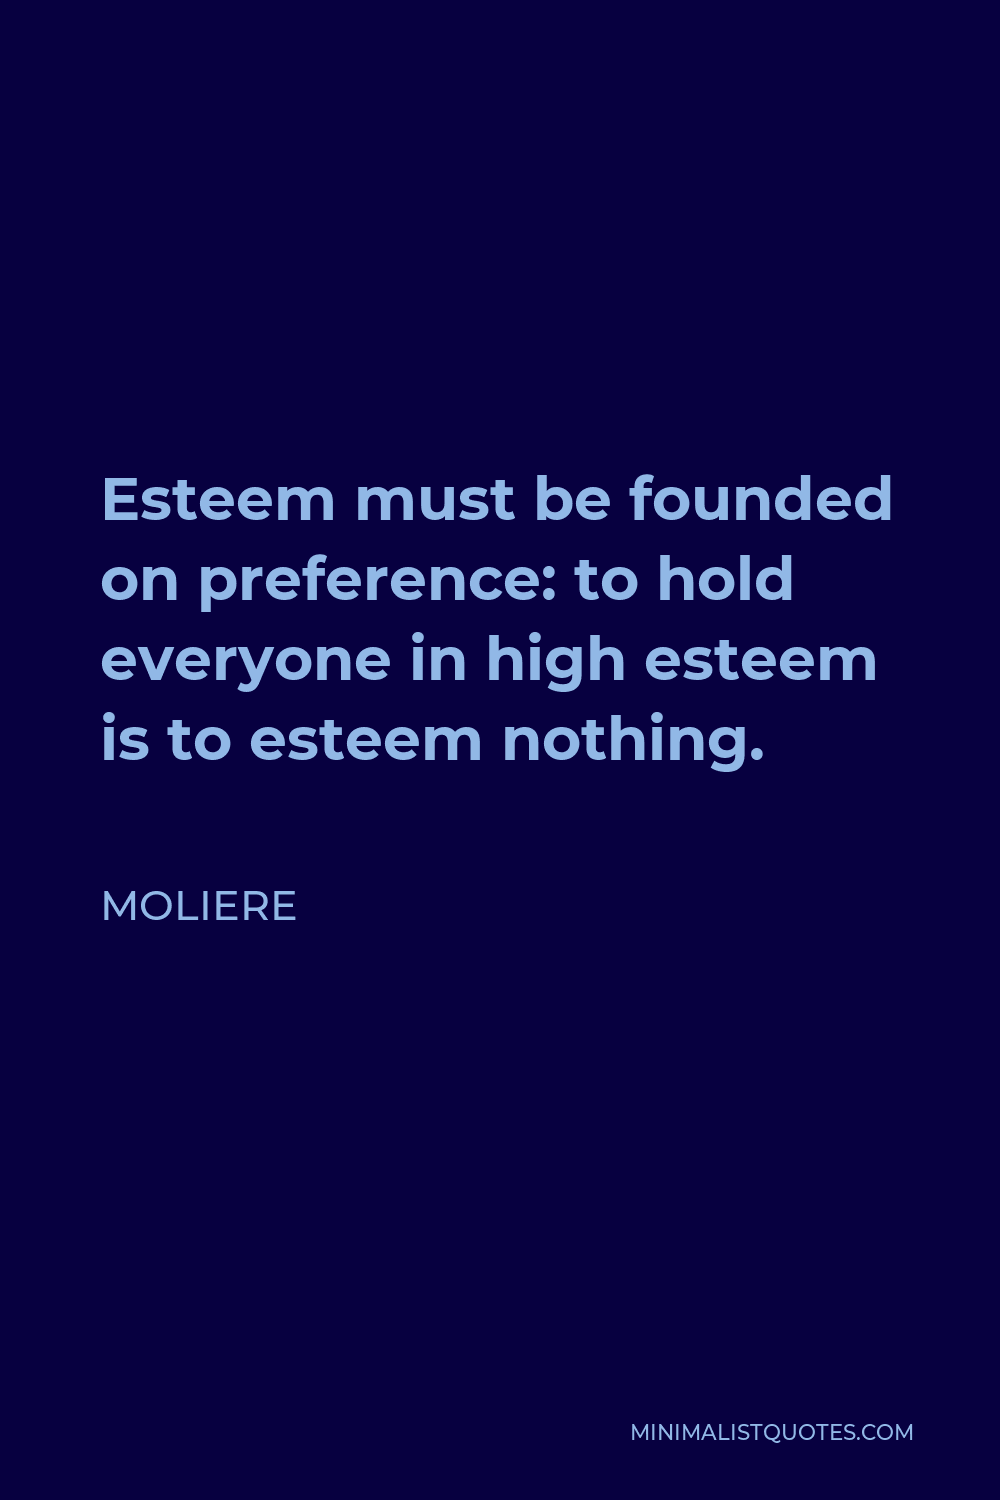 Moliere Quote - Esteem must be founded on preference: to hold everyone in high esteem is to esteem nothing.